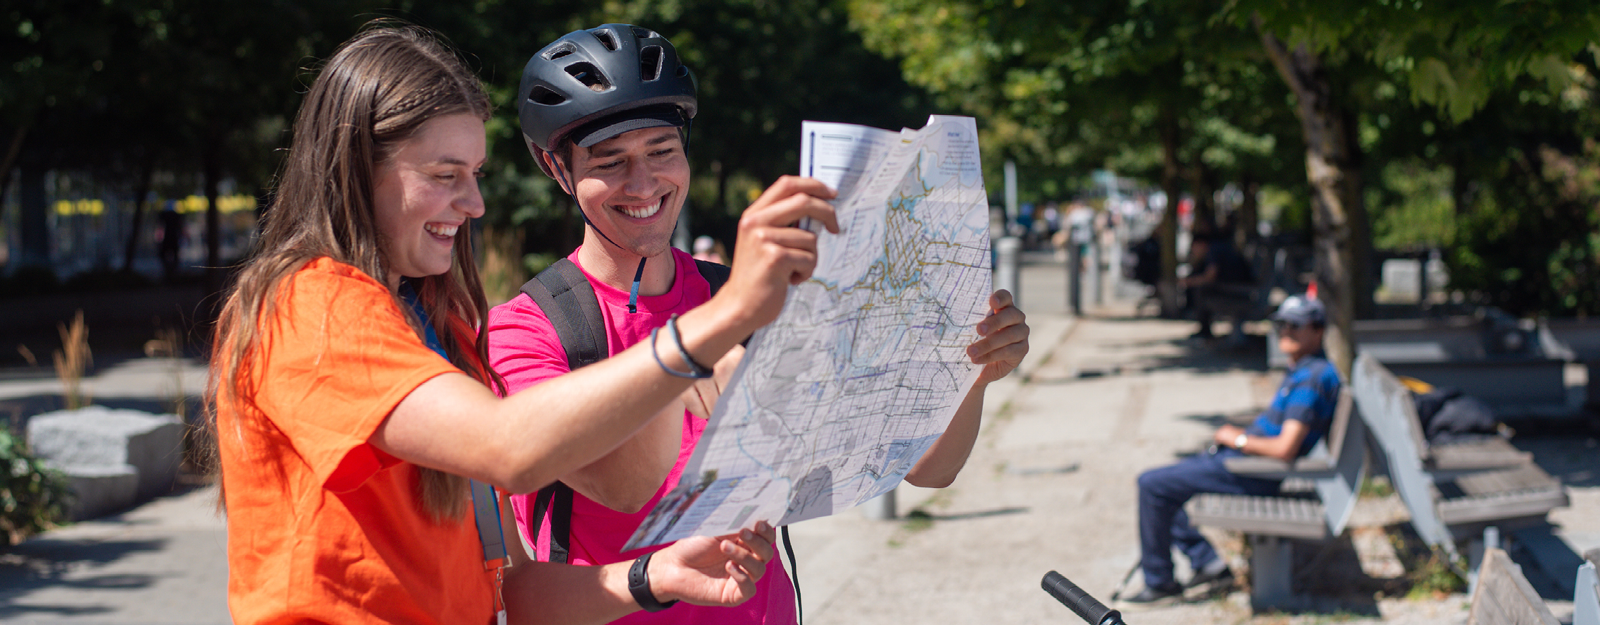 A young man and woman smile and look at a bike map together.